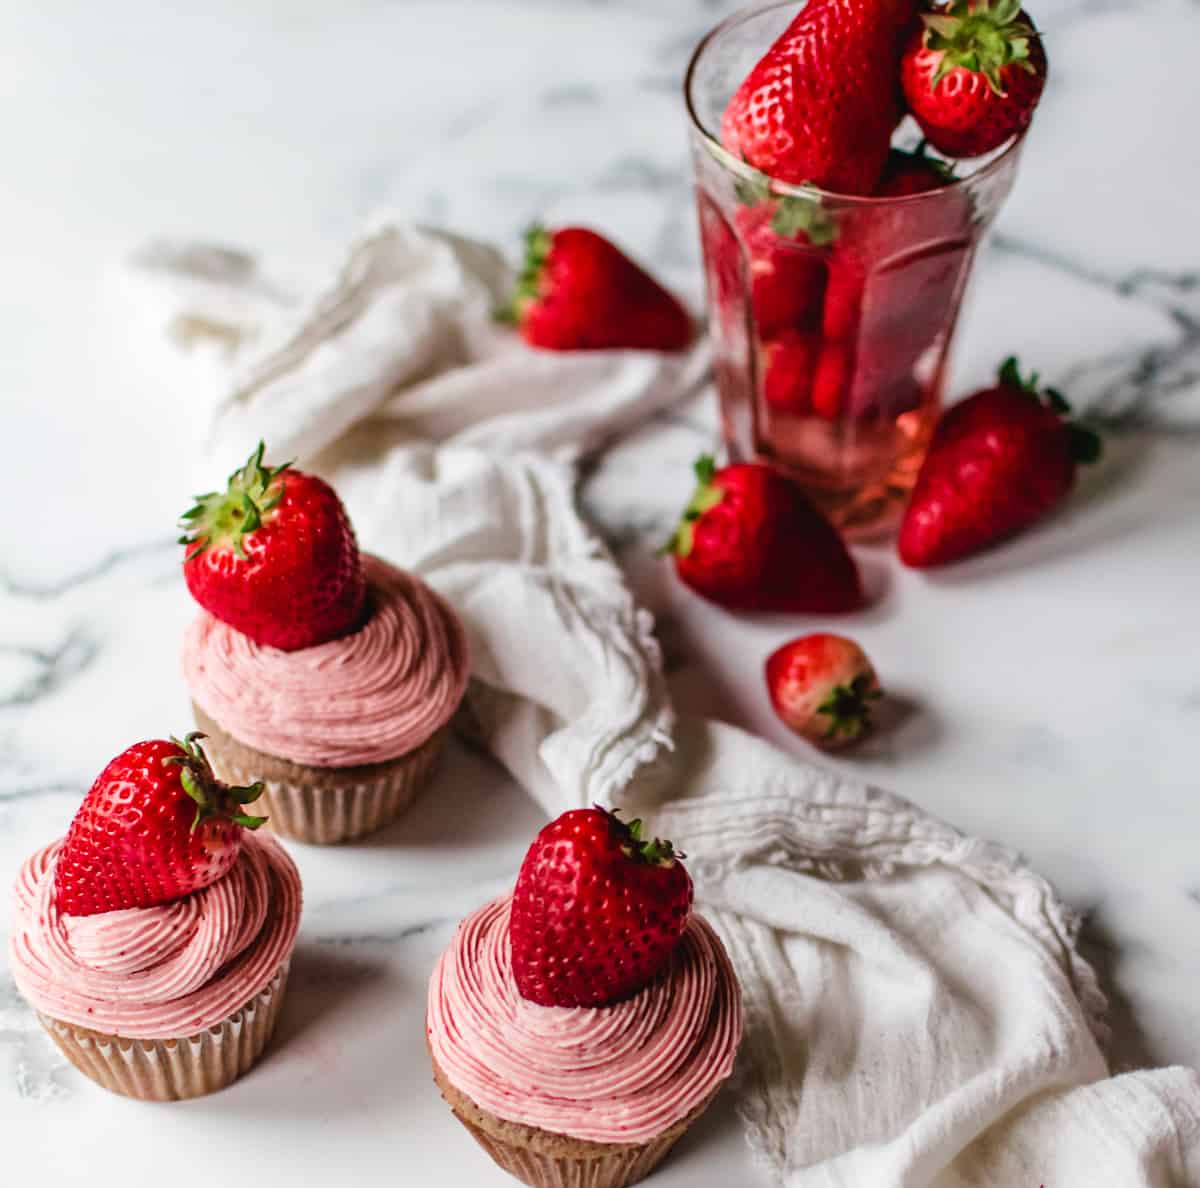 pink strawberry flavored cupcakes topped with a fresh strawberry